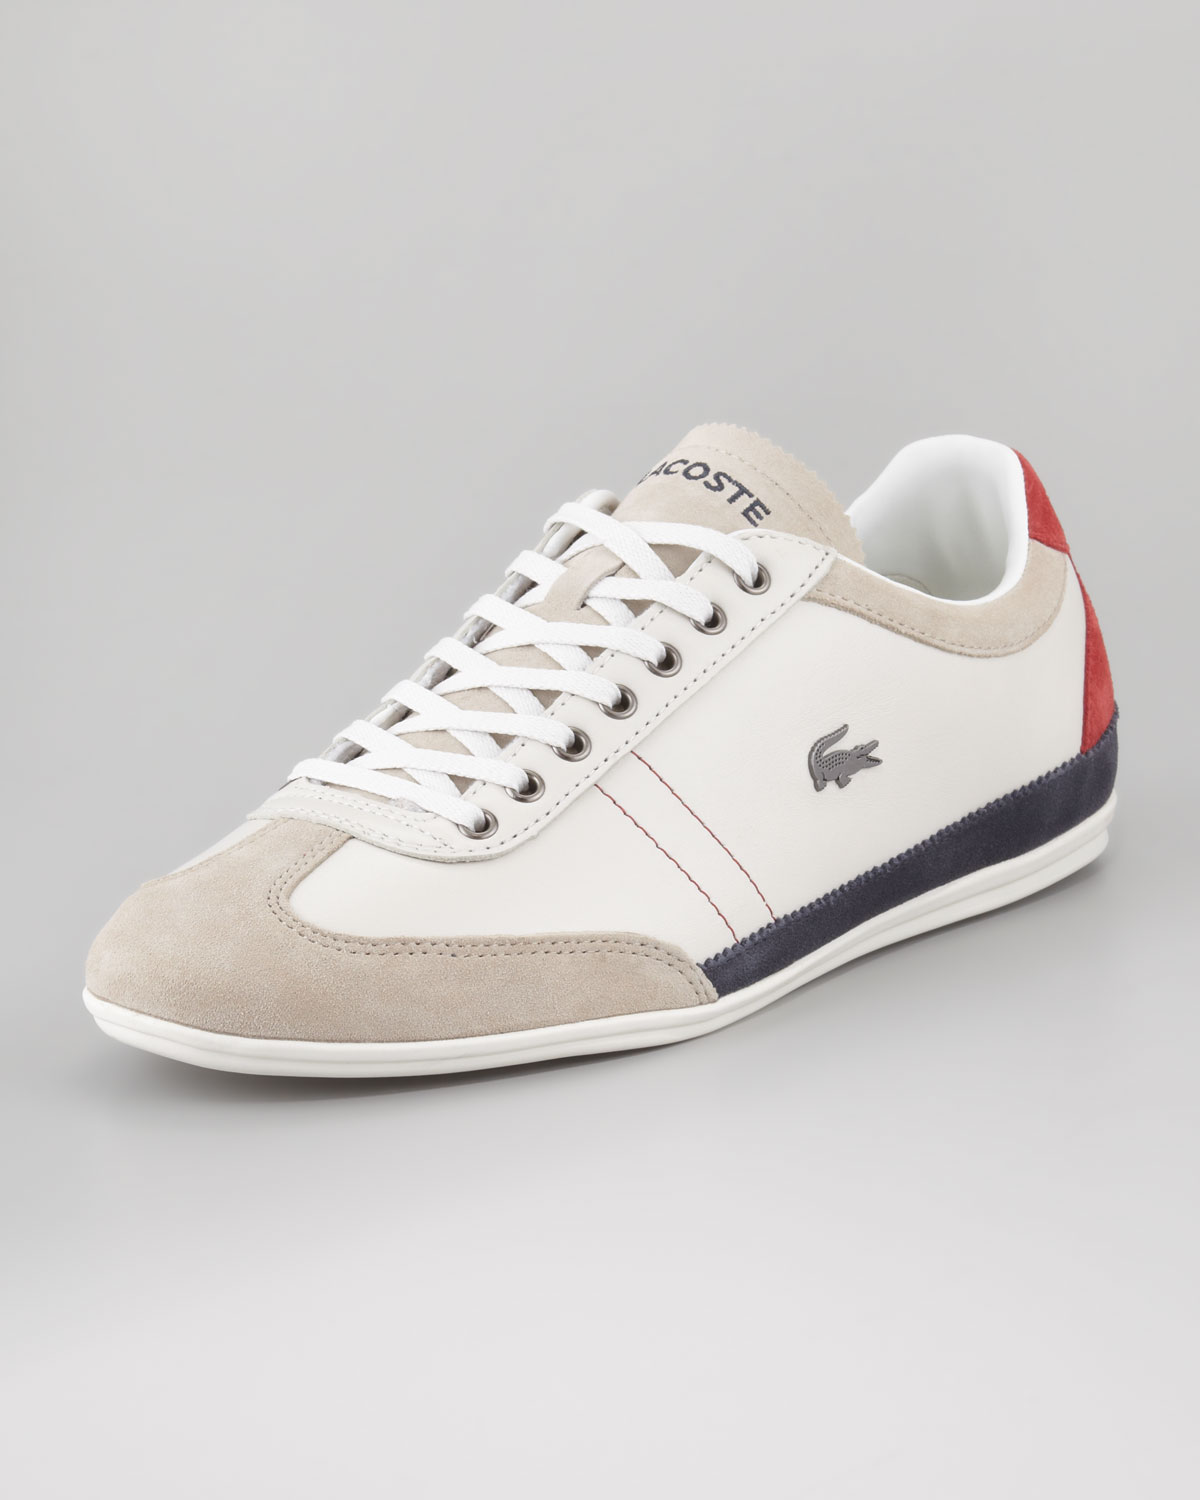 Lacoste Misano Tricolor Leather Sneaker in Natural for Men - Lyst